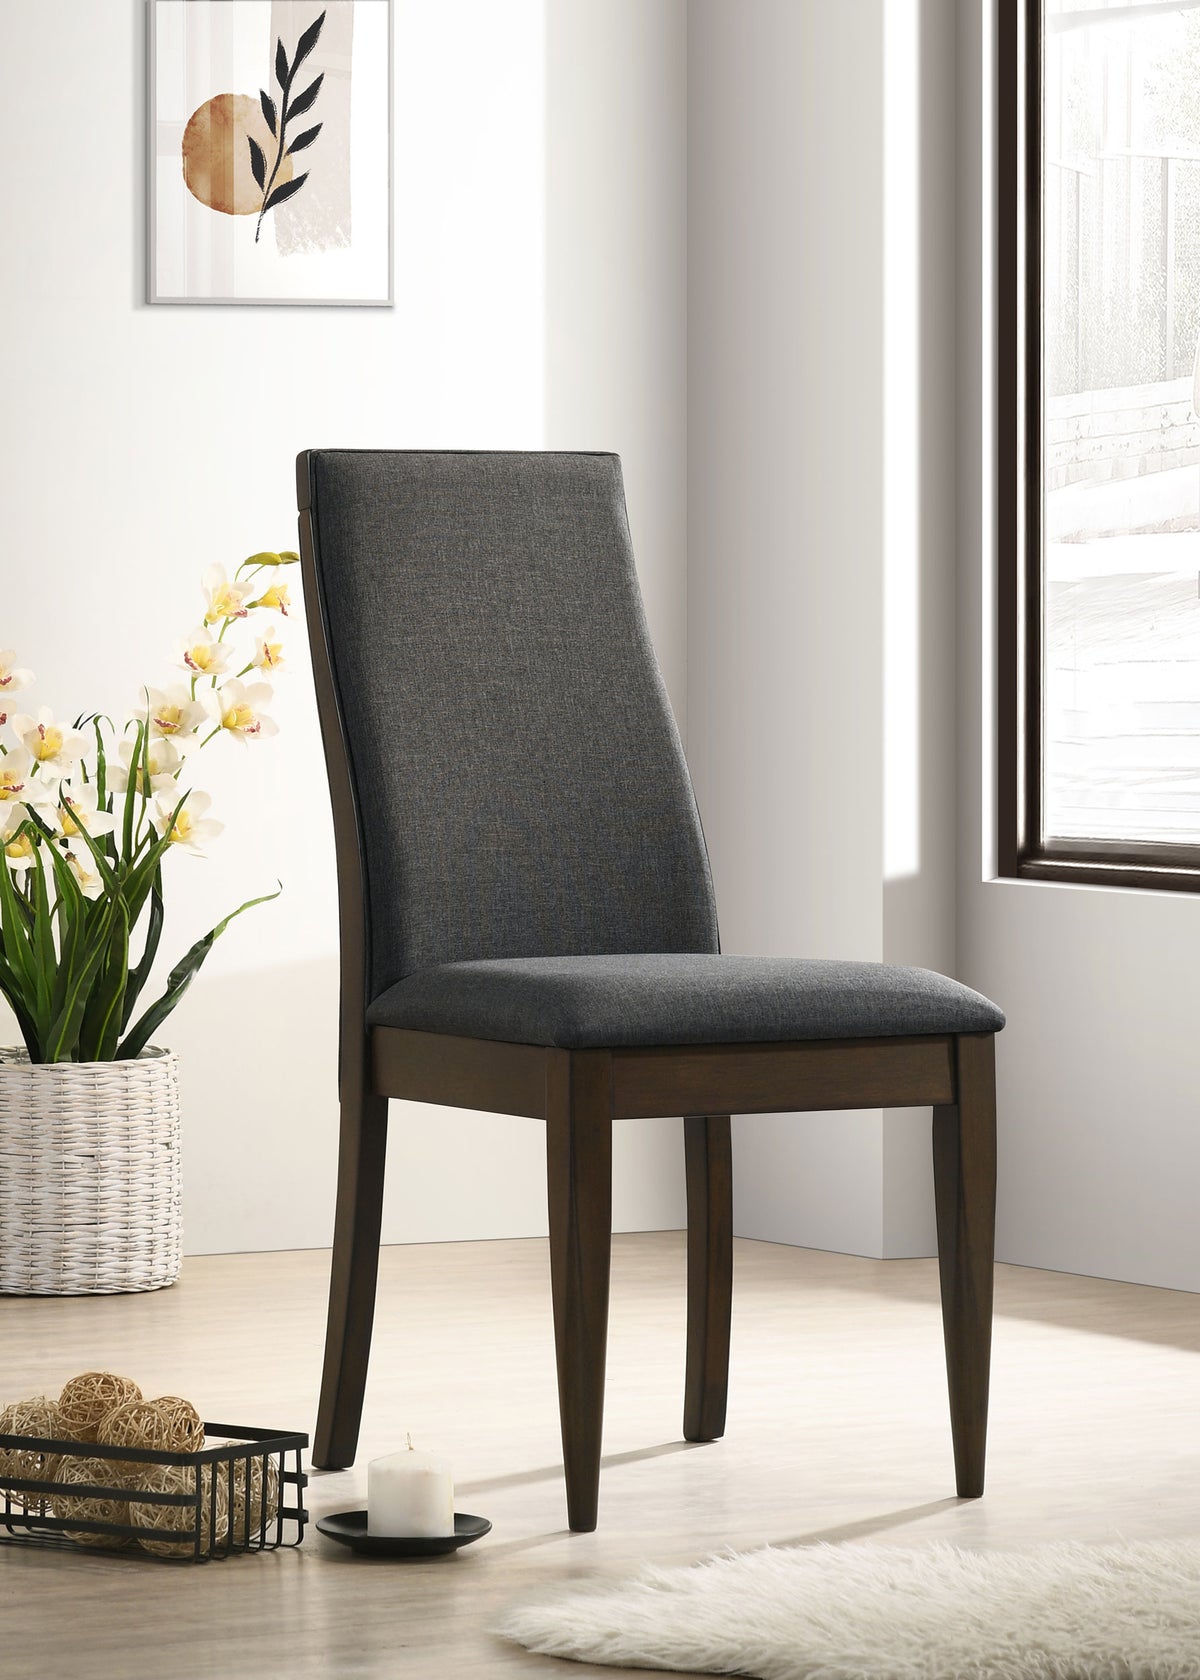 Wes Upholstered Side Chair (Set of 2) Grey and Dark Walnut Wes Upholstered Side Chair (Set of 2) Grey and Dark Walnut Half Price Furniture